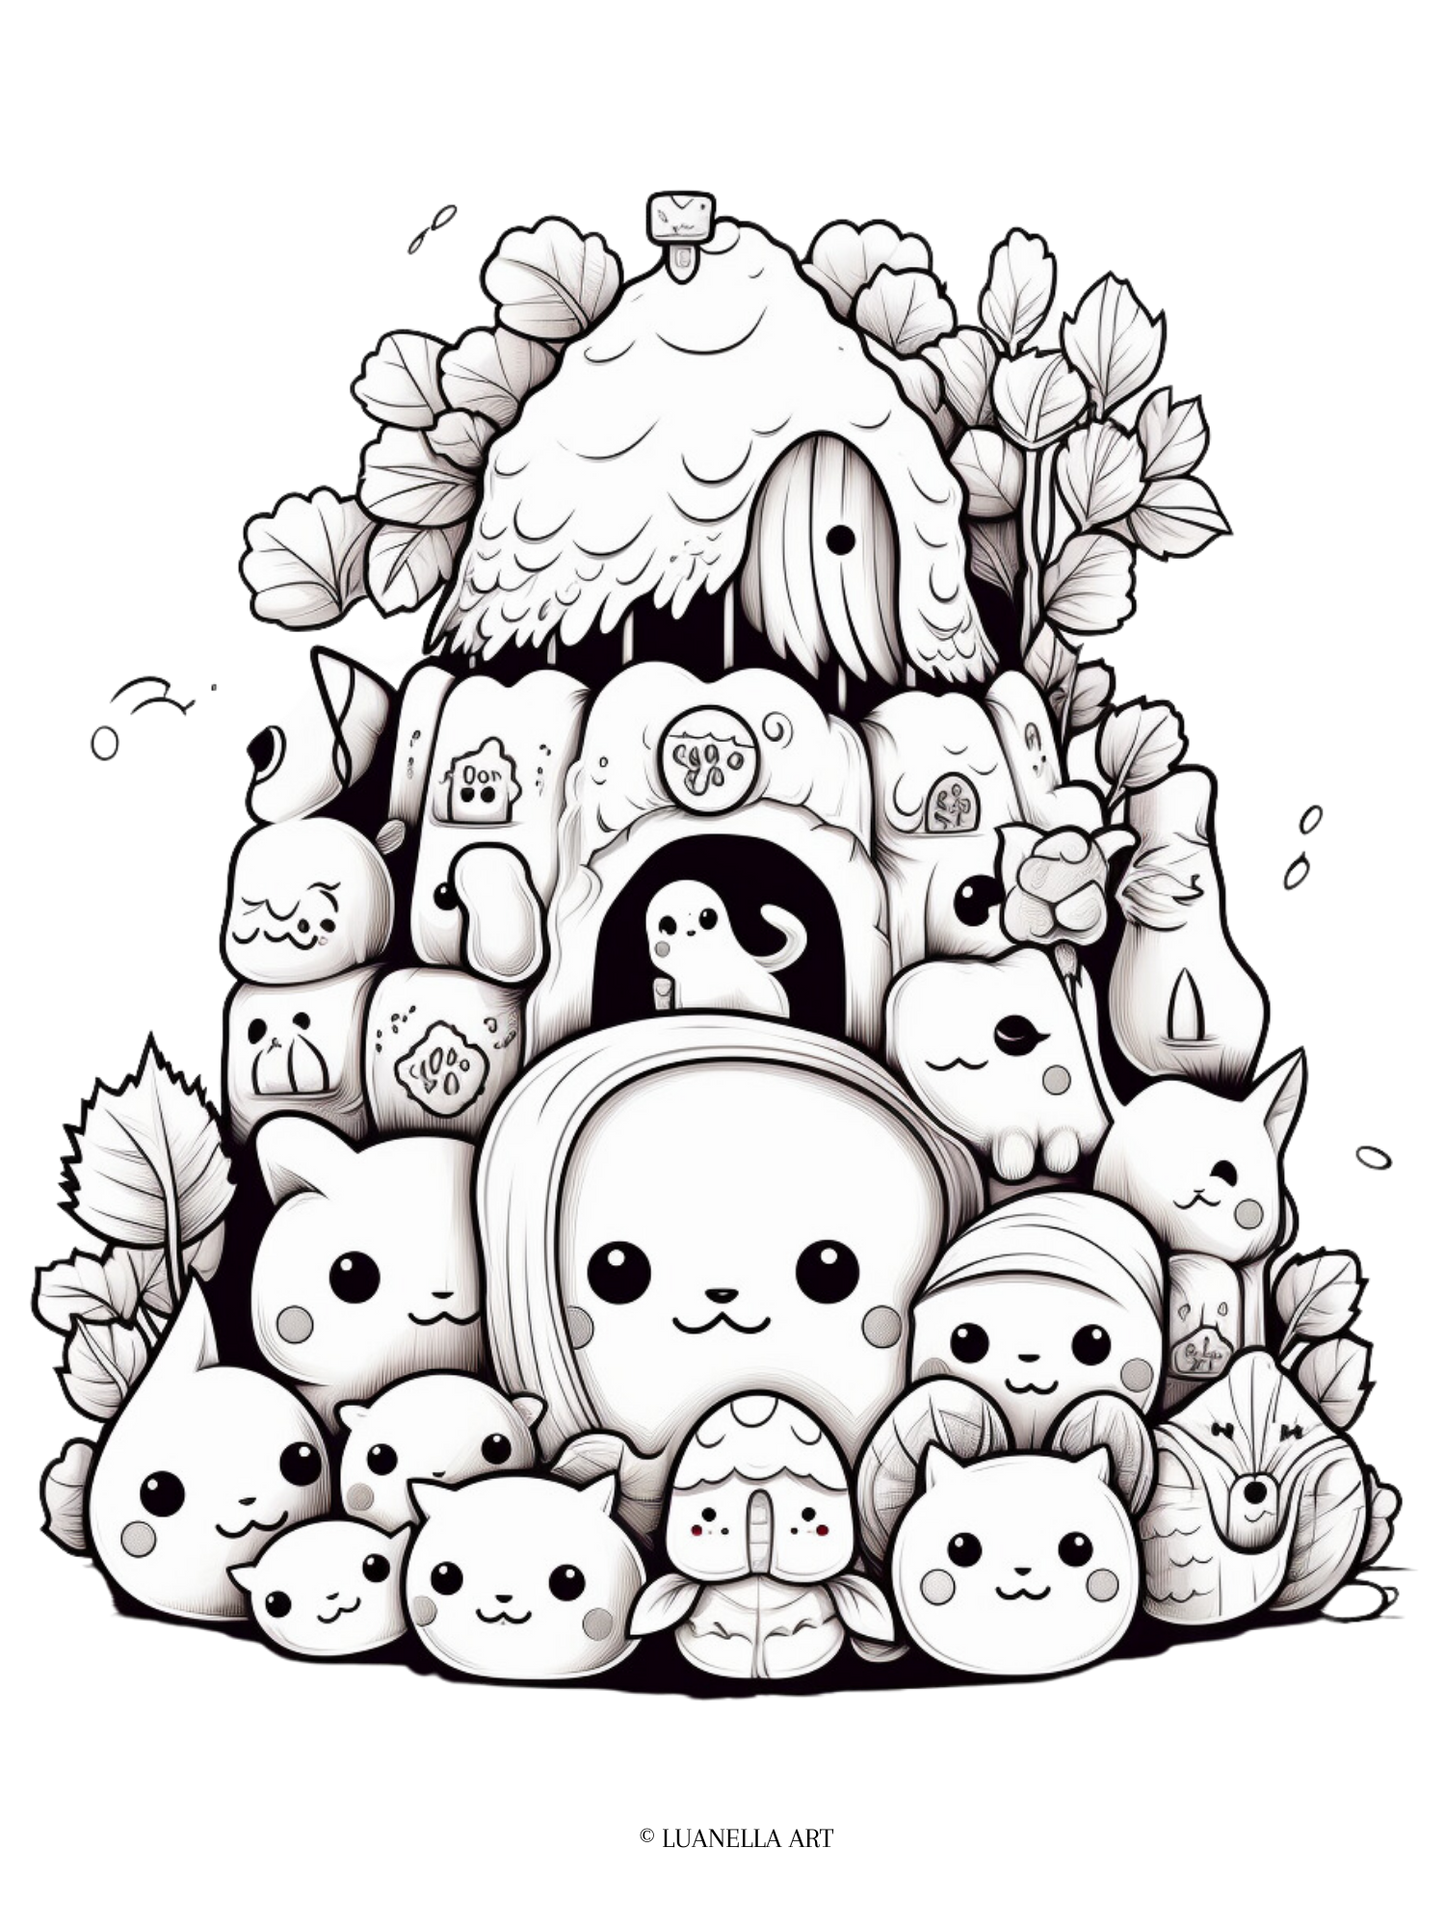 Squishmallow group | Coloring Page | Instant Digital Download